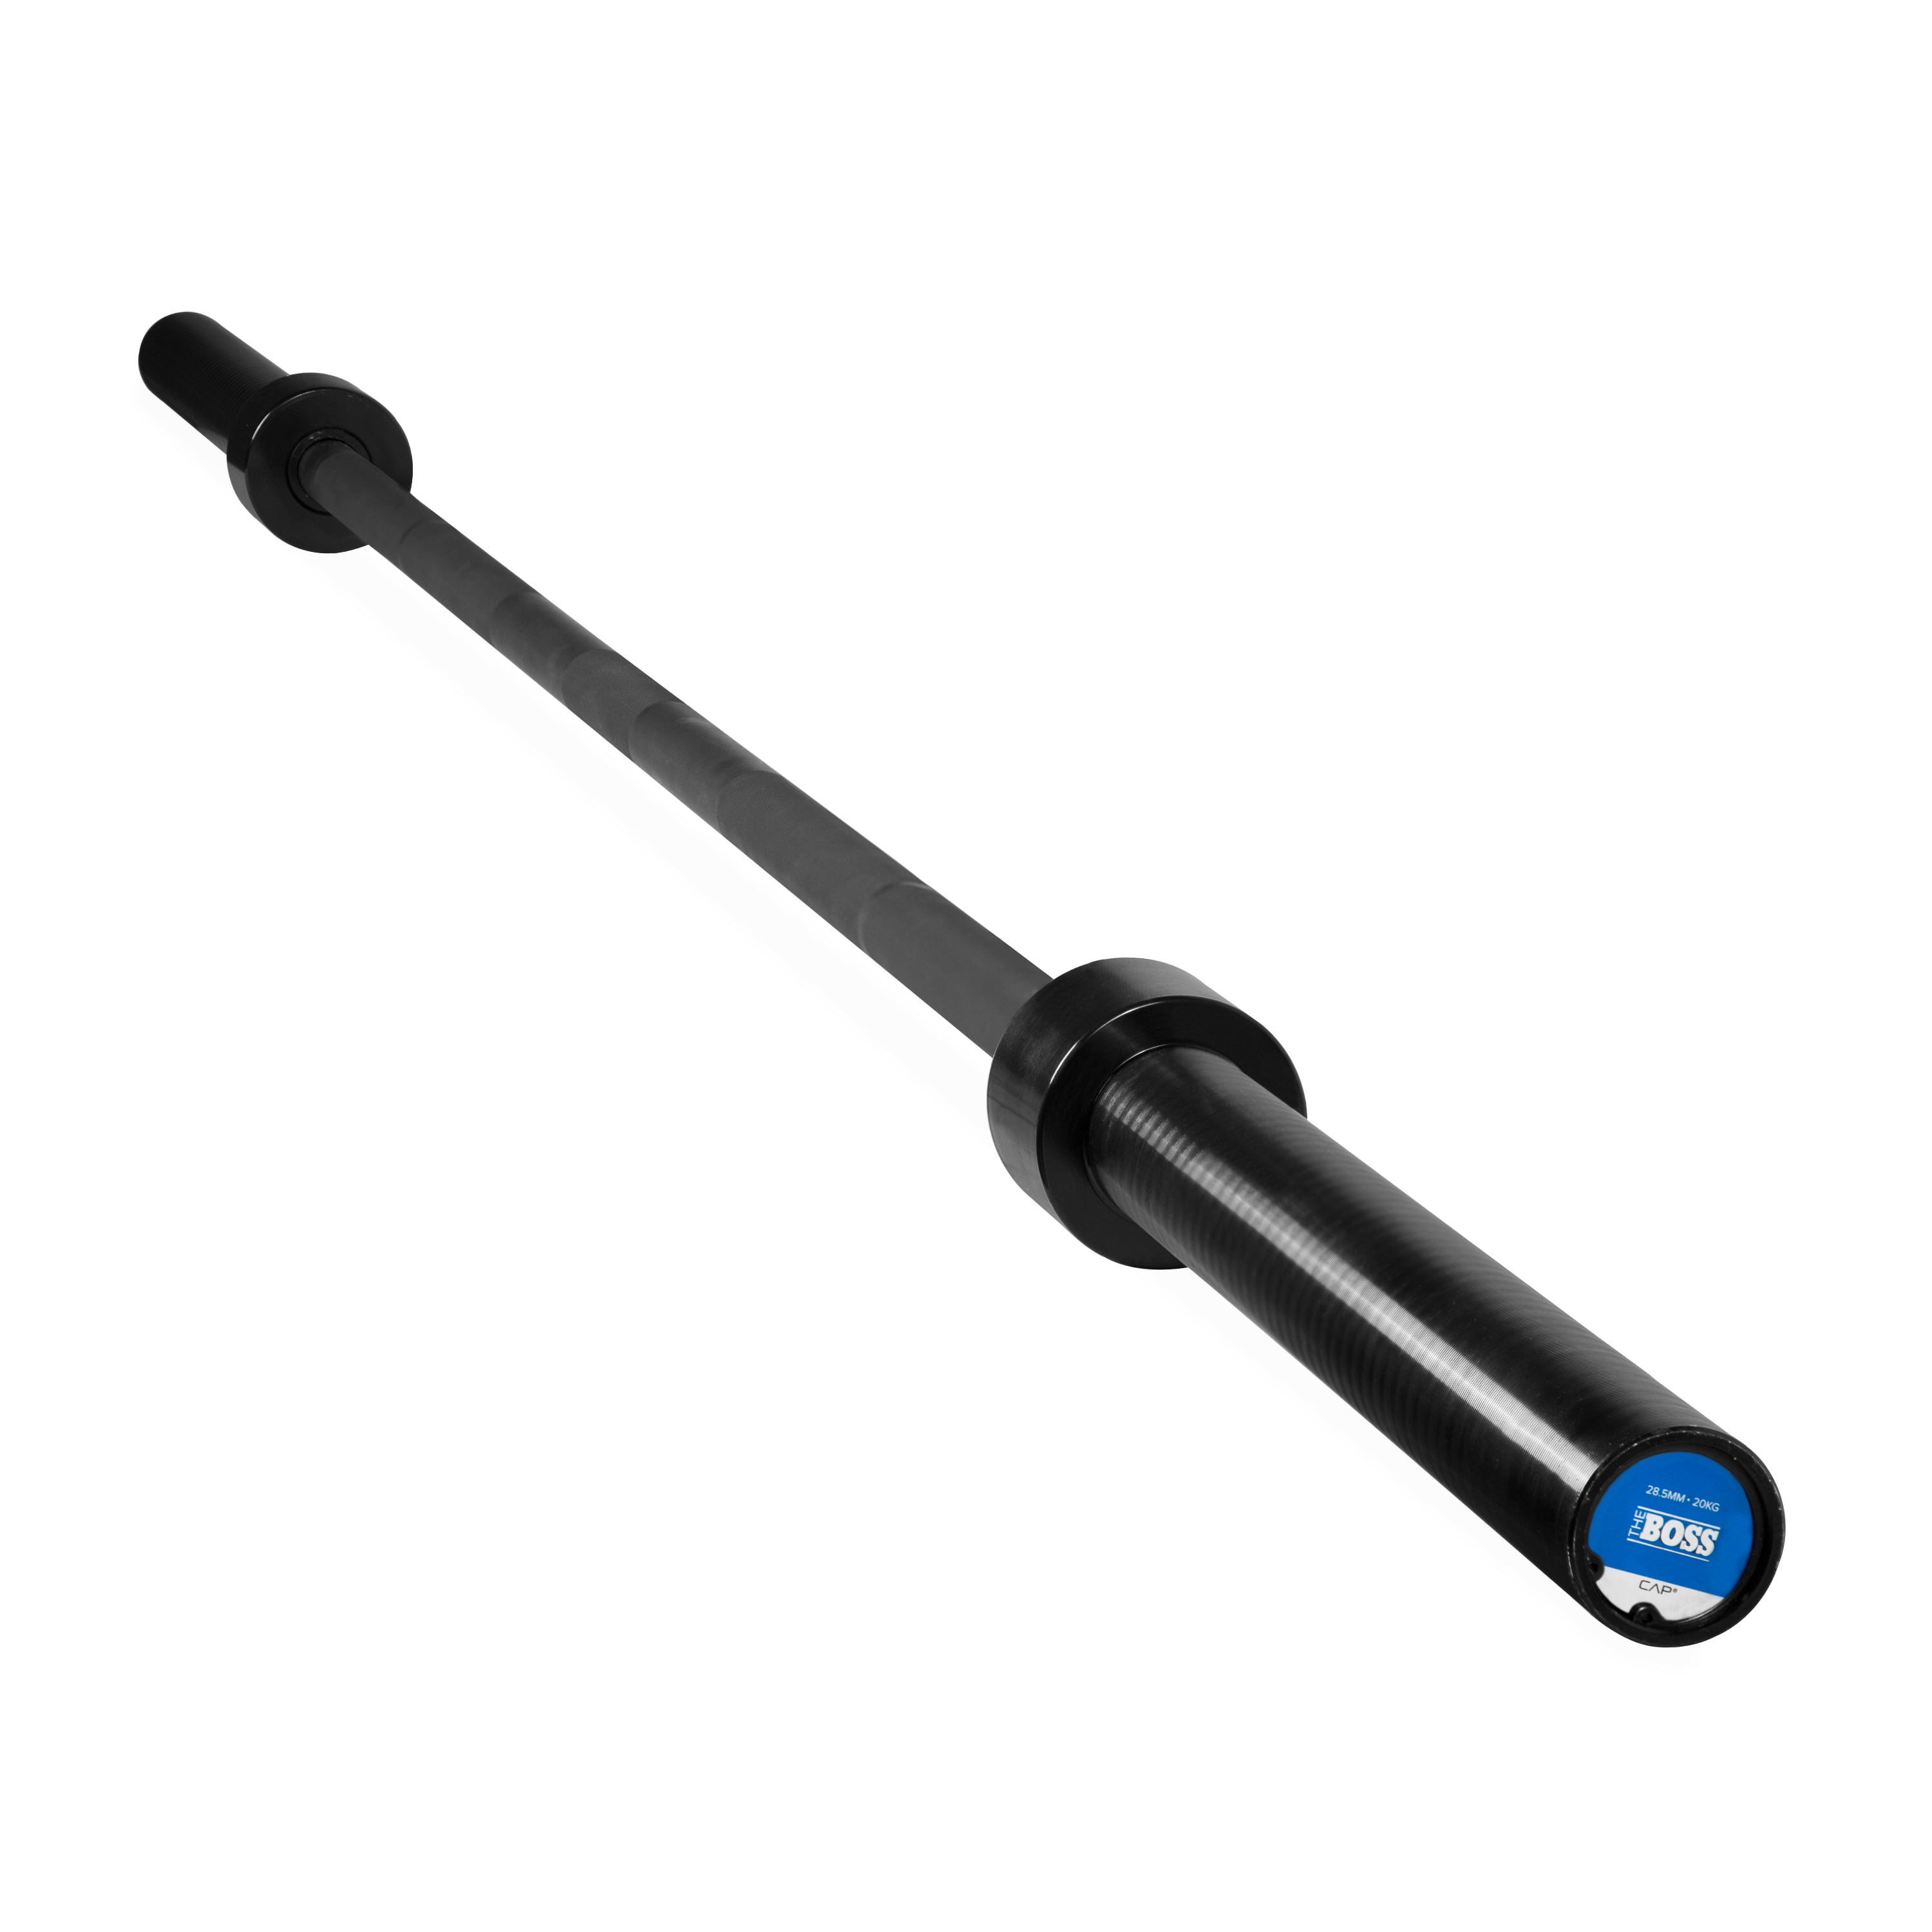 Details about   7ft /86in Barbell Straight Standard Weight Lifting Threaded Ends Fitness Workout 